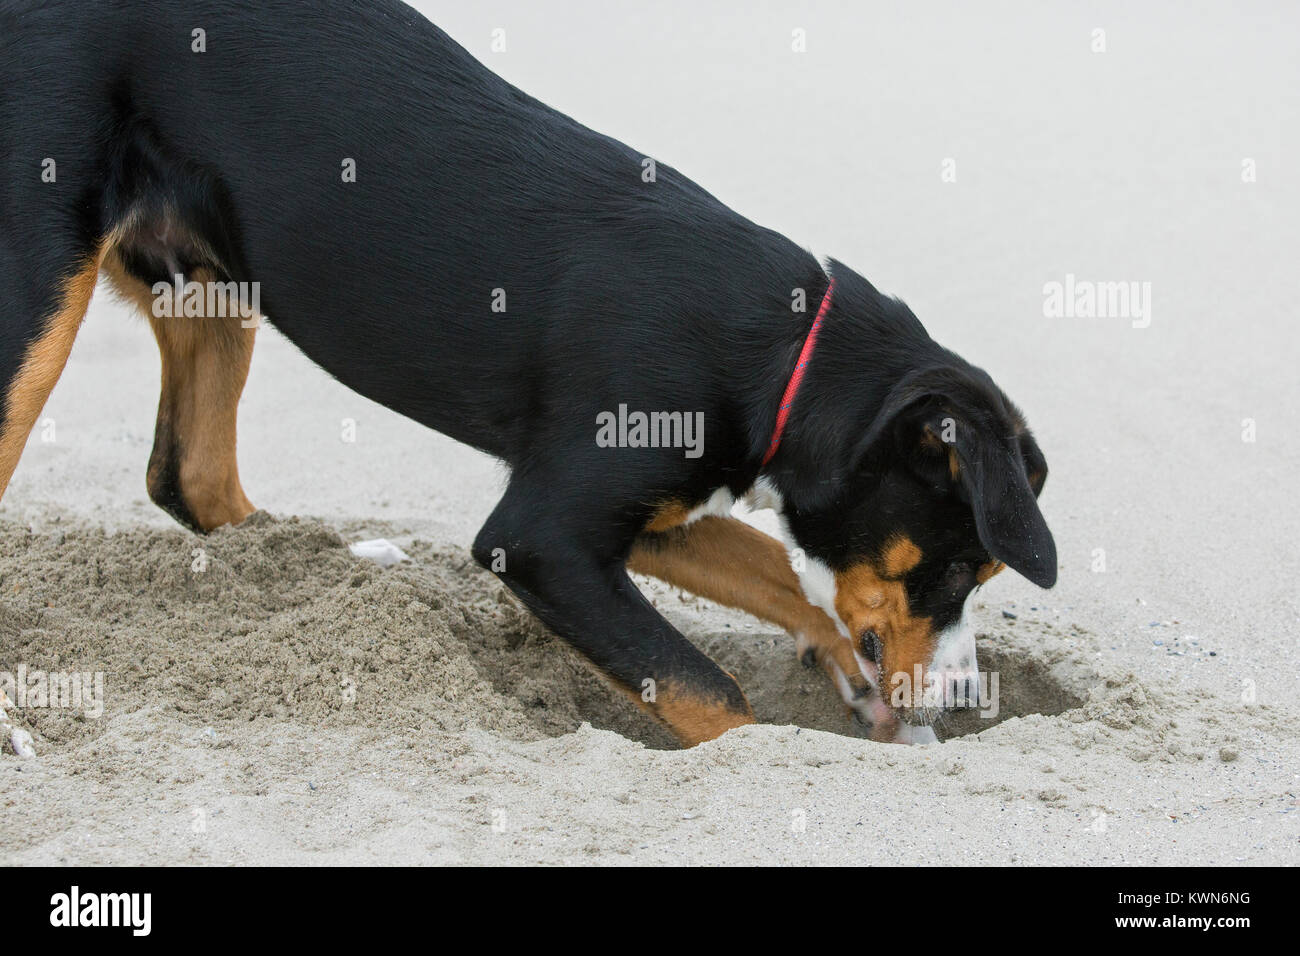 Young Greater Swiss Mountain Dog / Grosser Schweizer Sennenhund digging a hole in sand of sandy beach along the coast Stock Photo